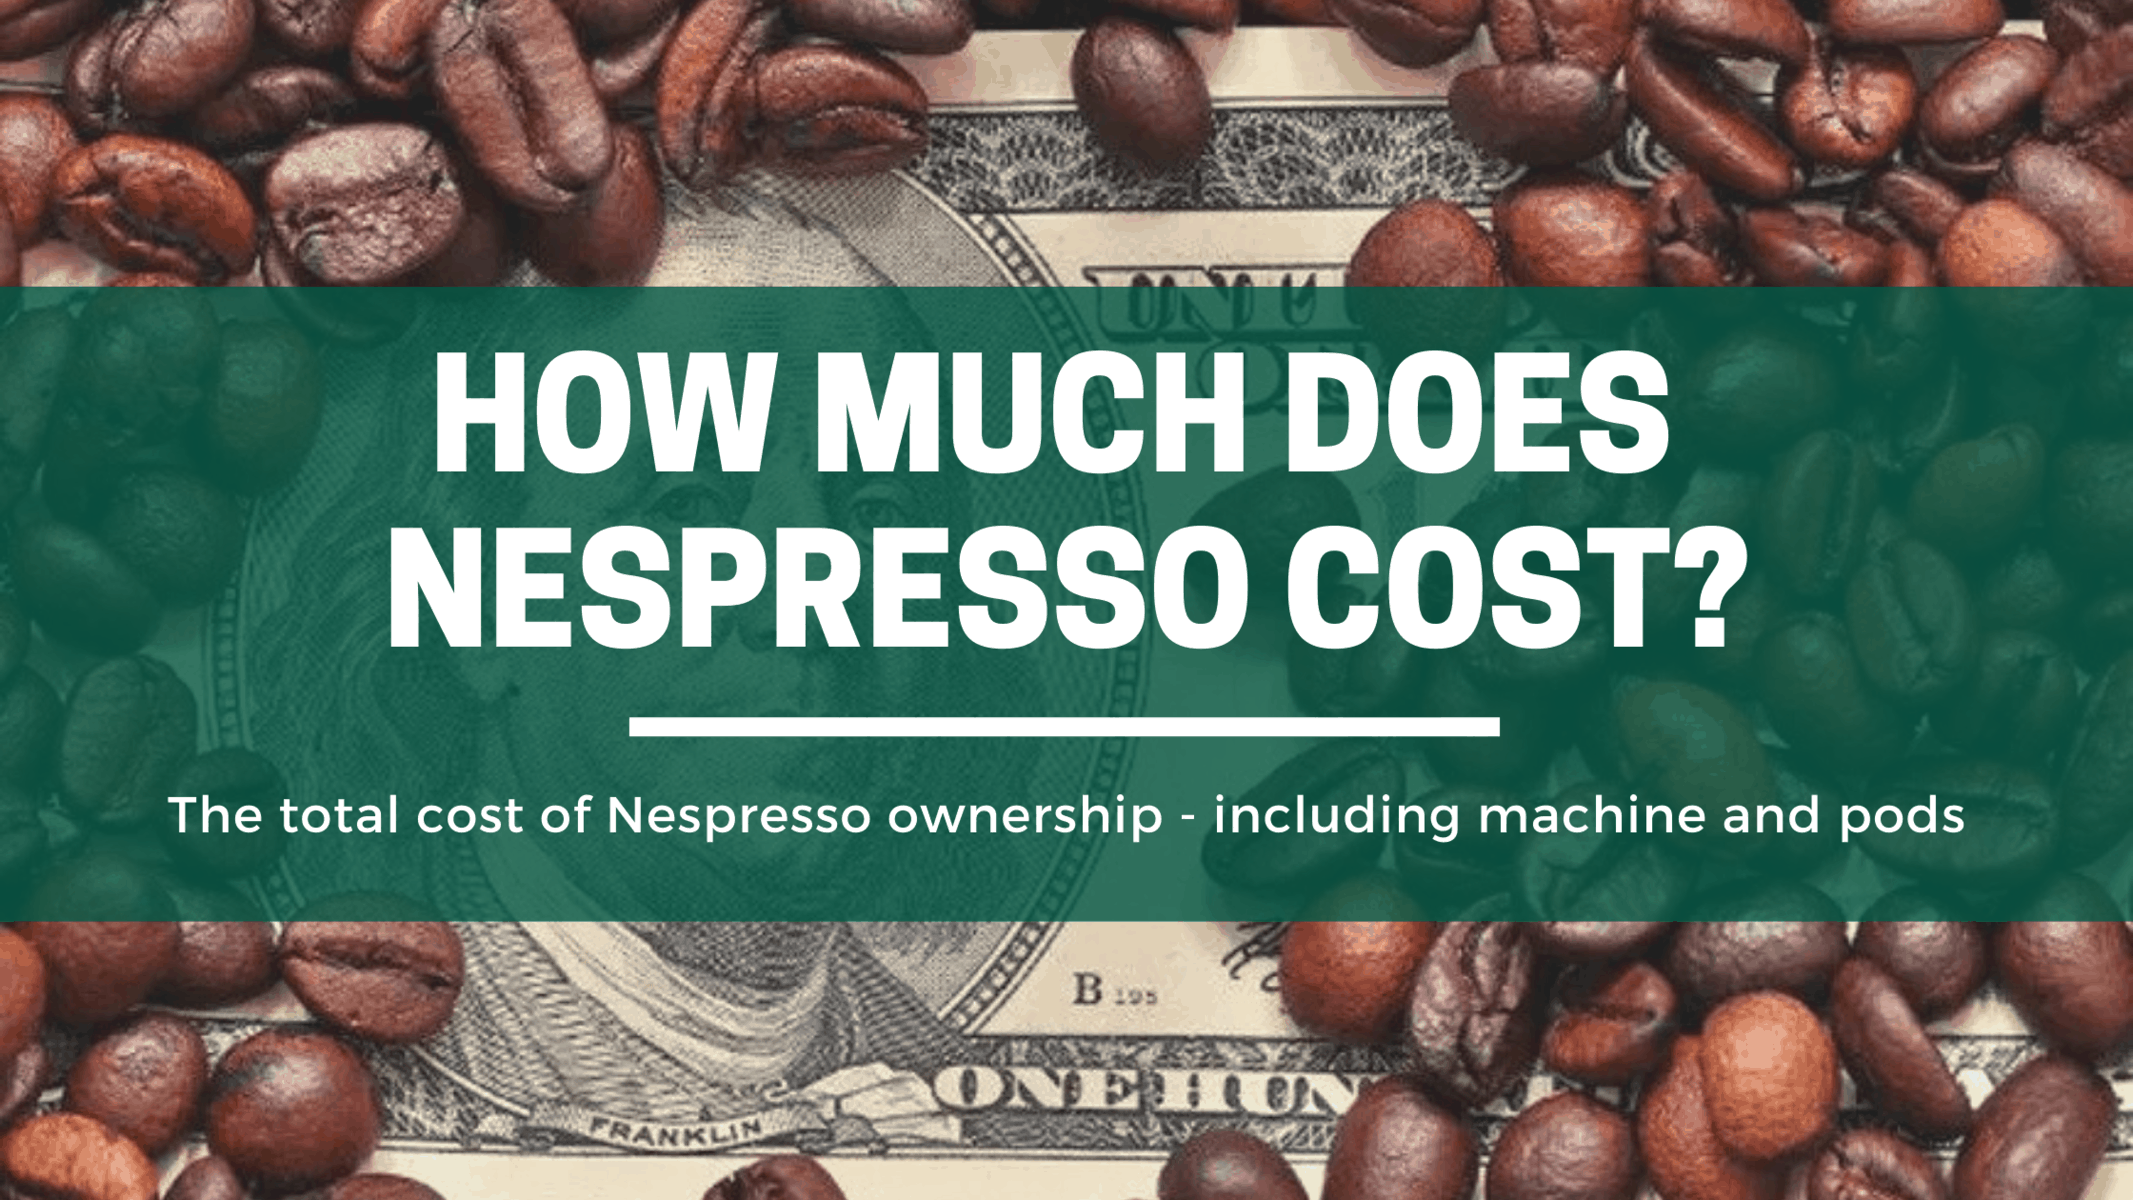 dok tømmerflåde lilla How Much Does Nespresso Cost? (You'll Be Shocked!) – The Green Pods